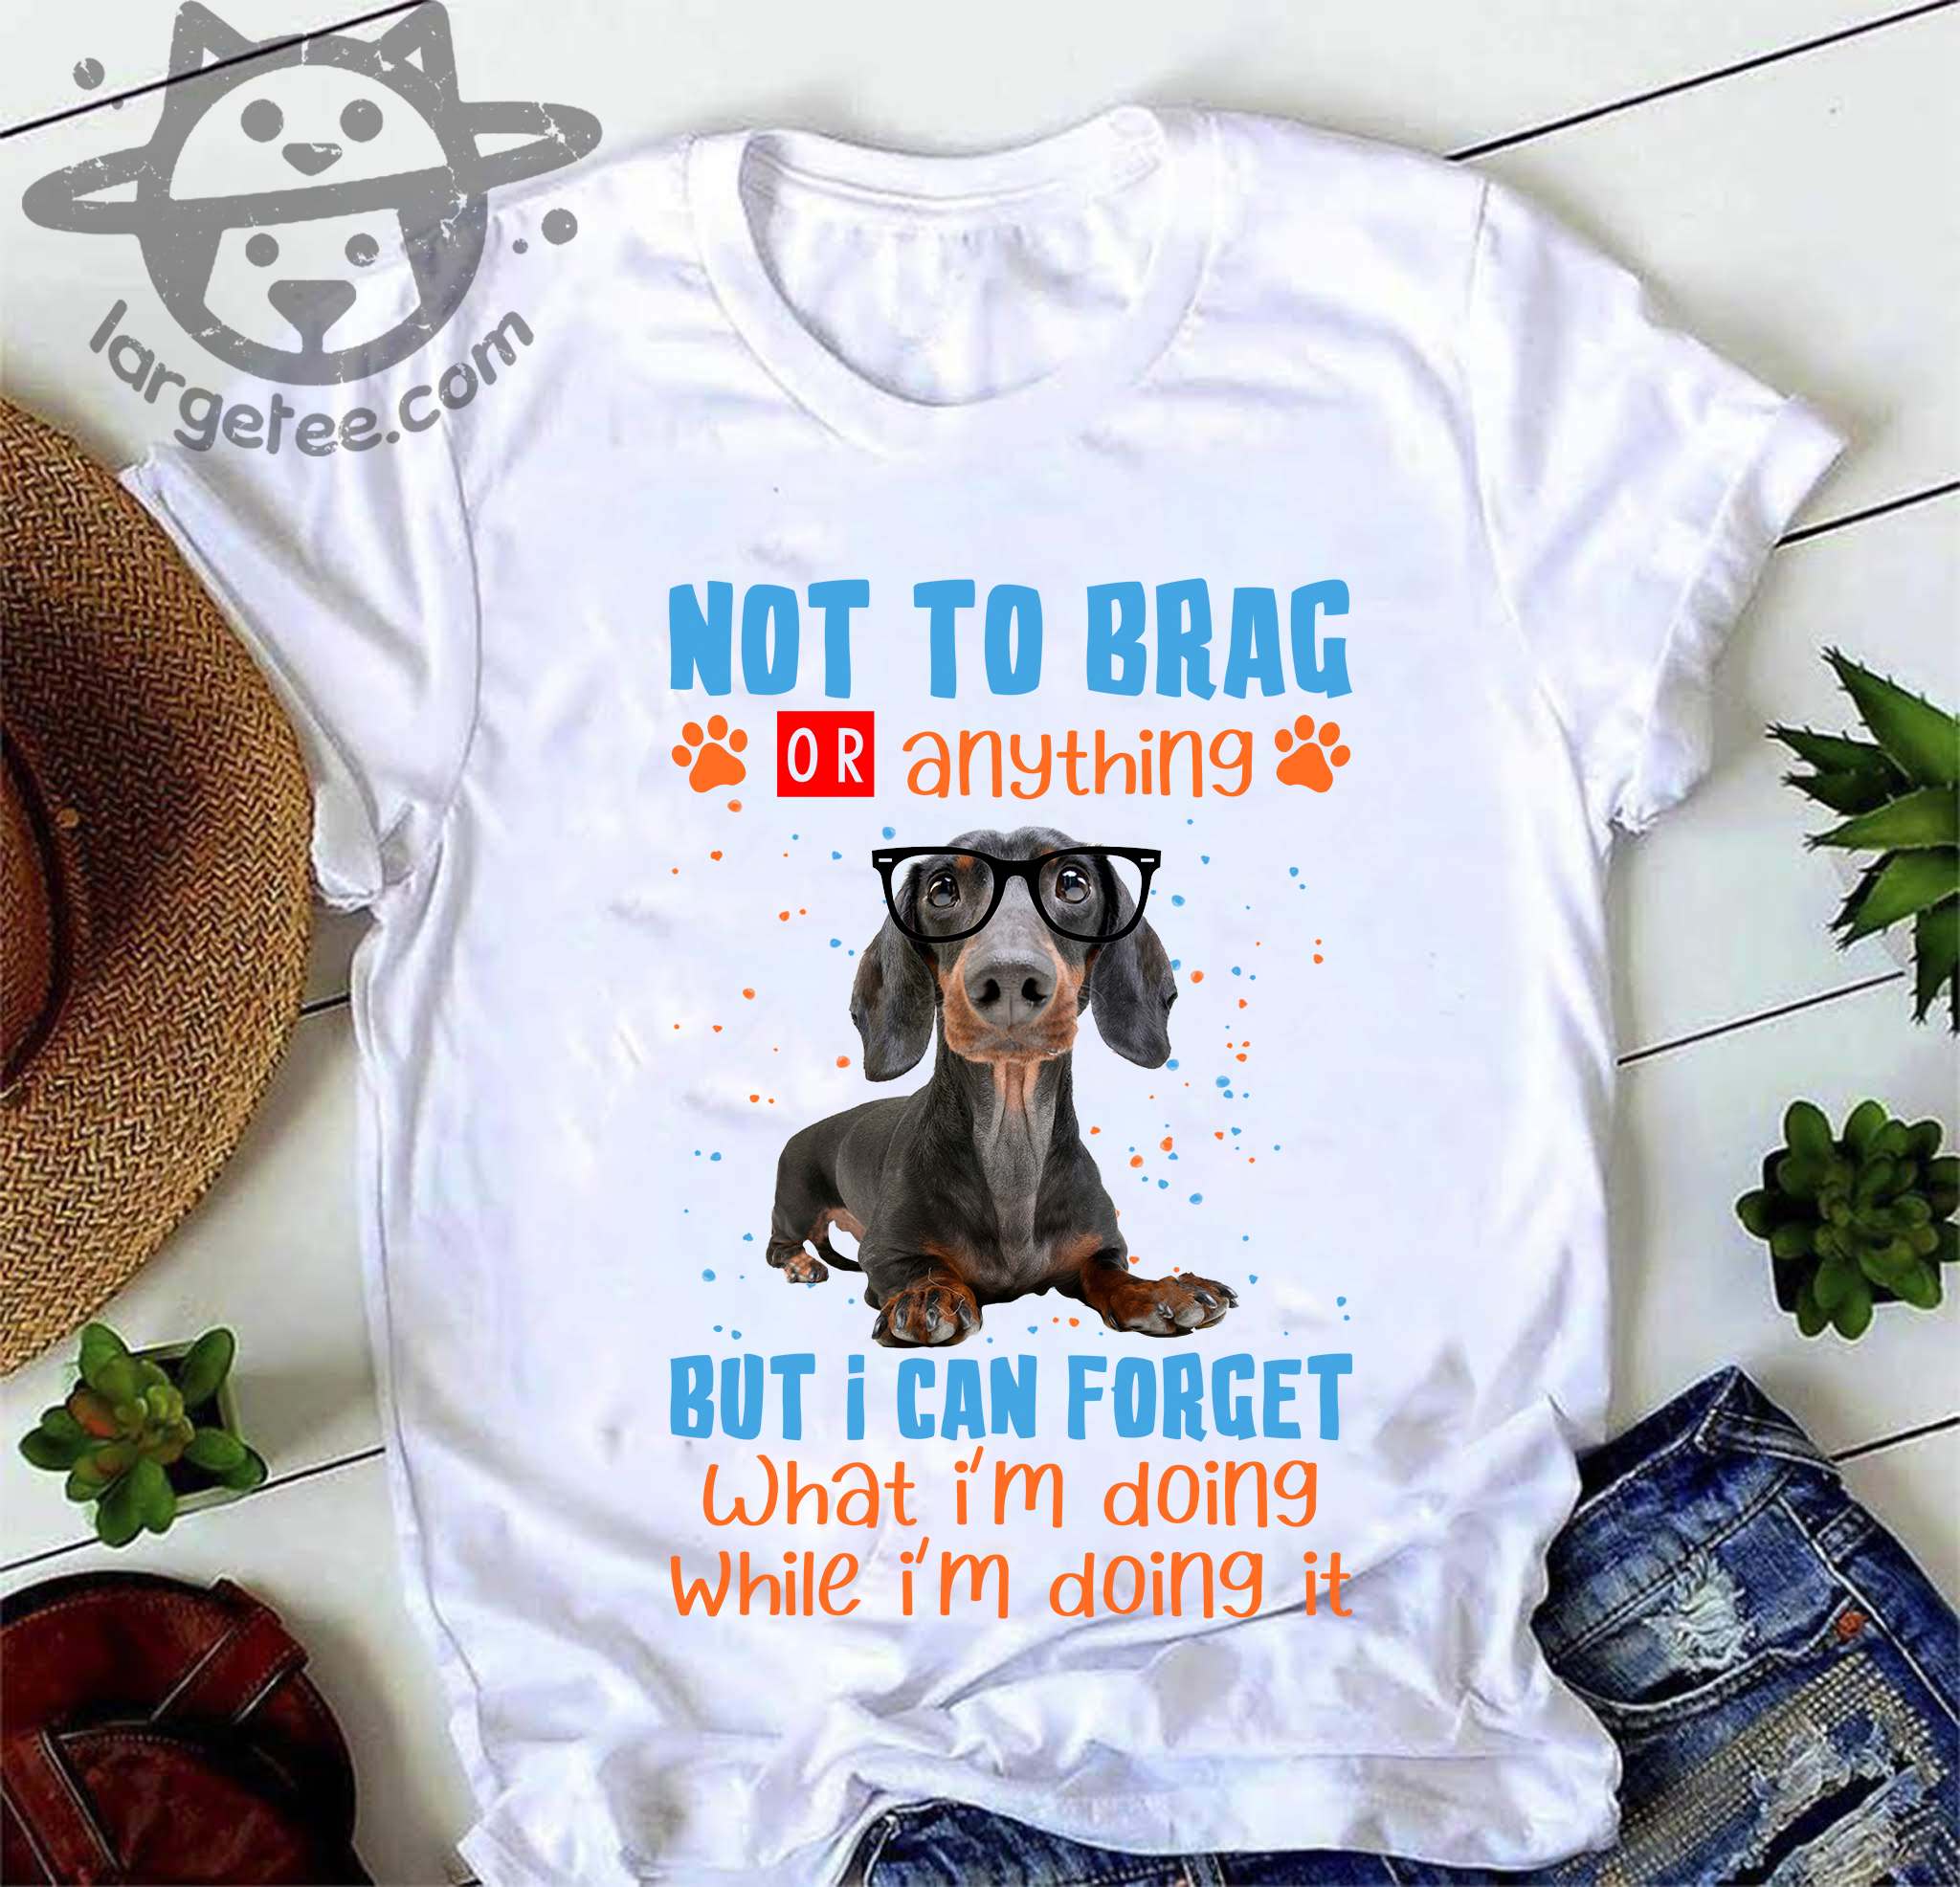 Not to brag or anything but I can forget what I'm doing while I'm doing it - Dachshund dog